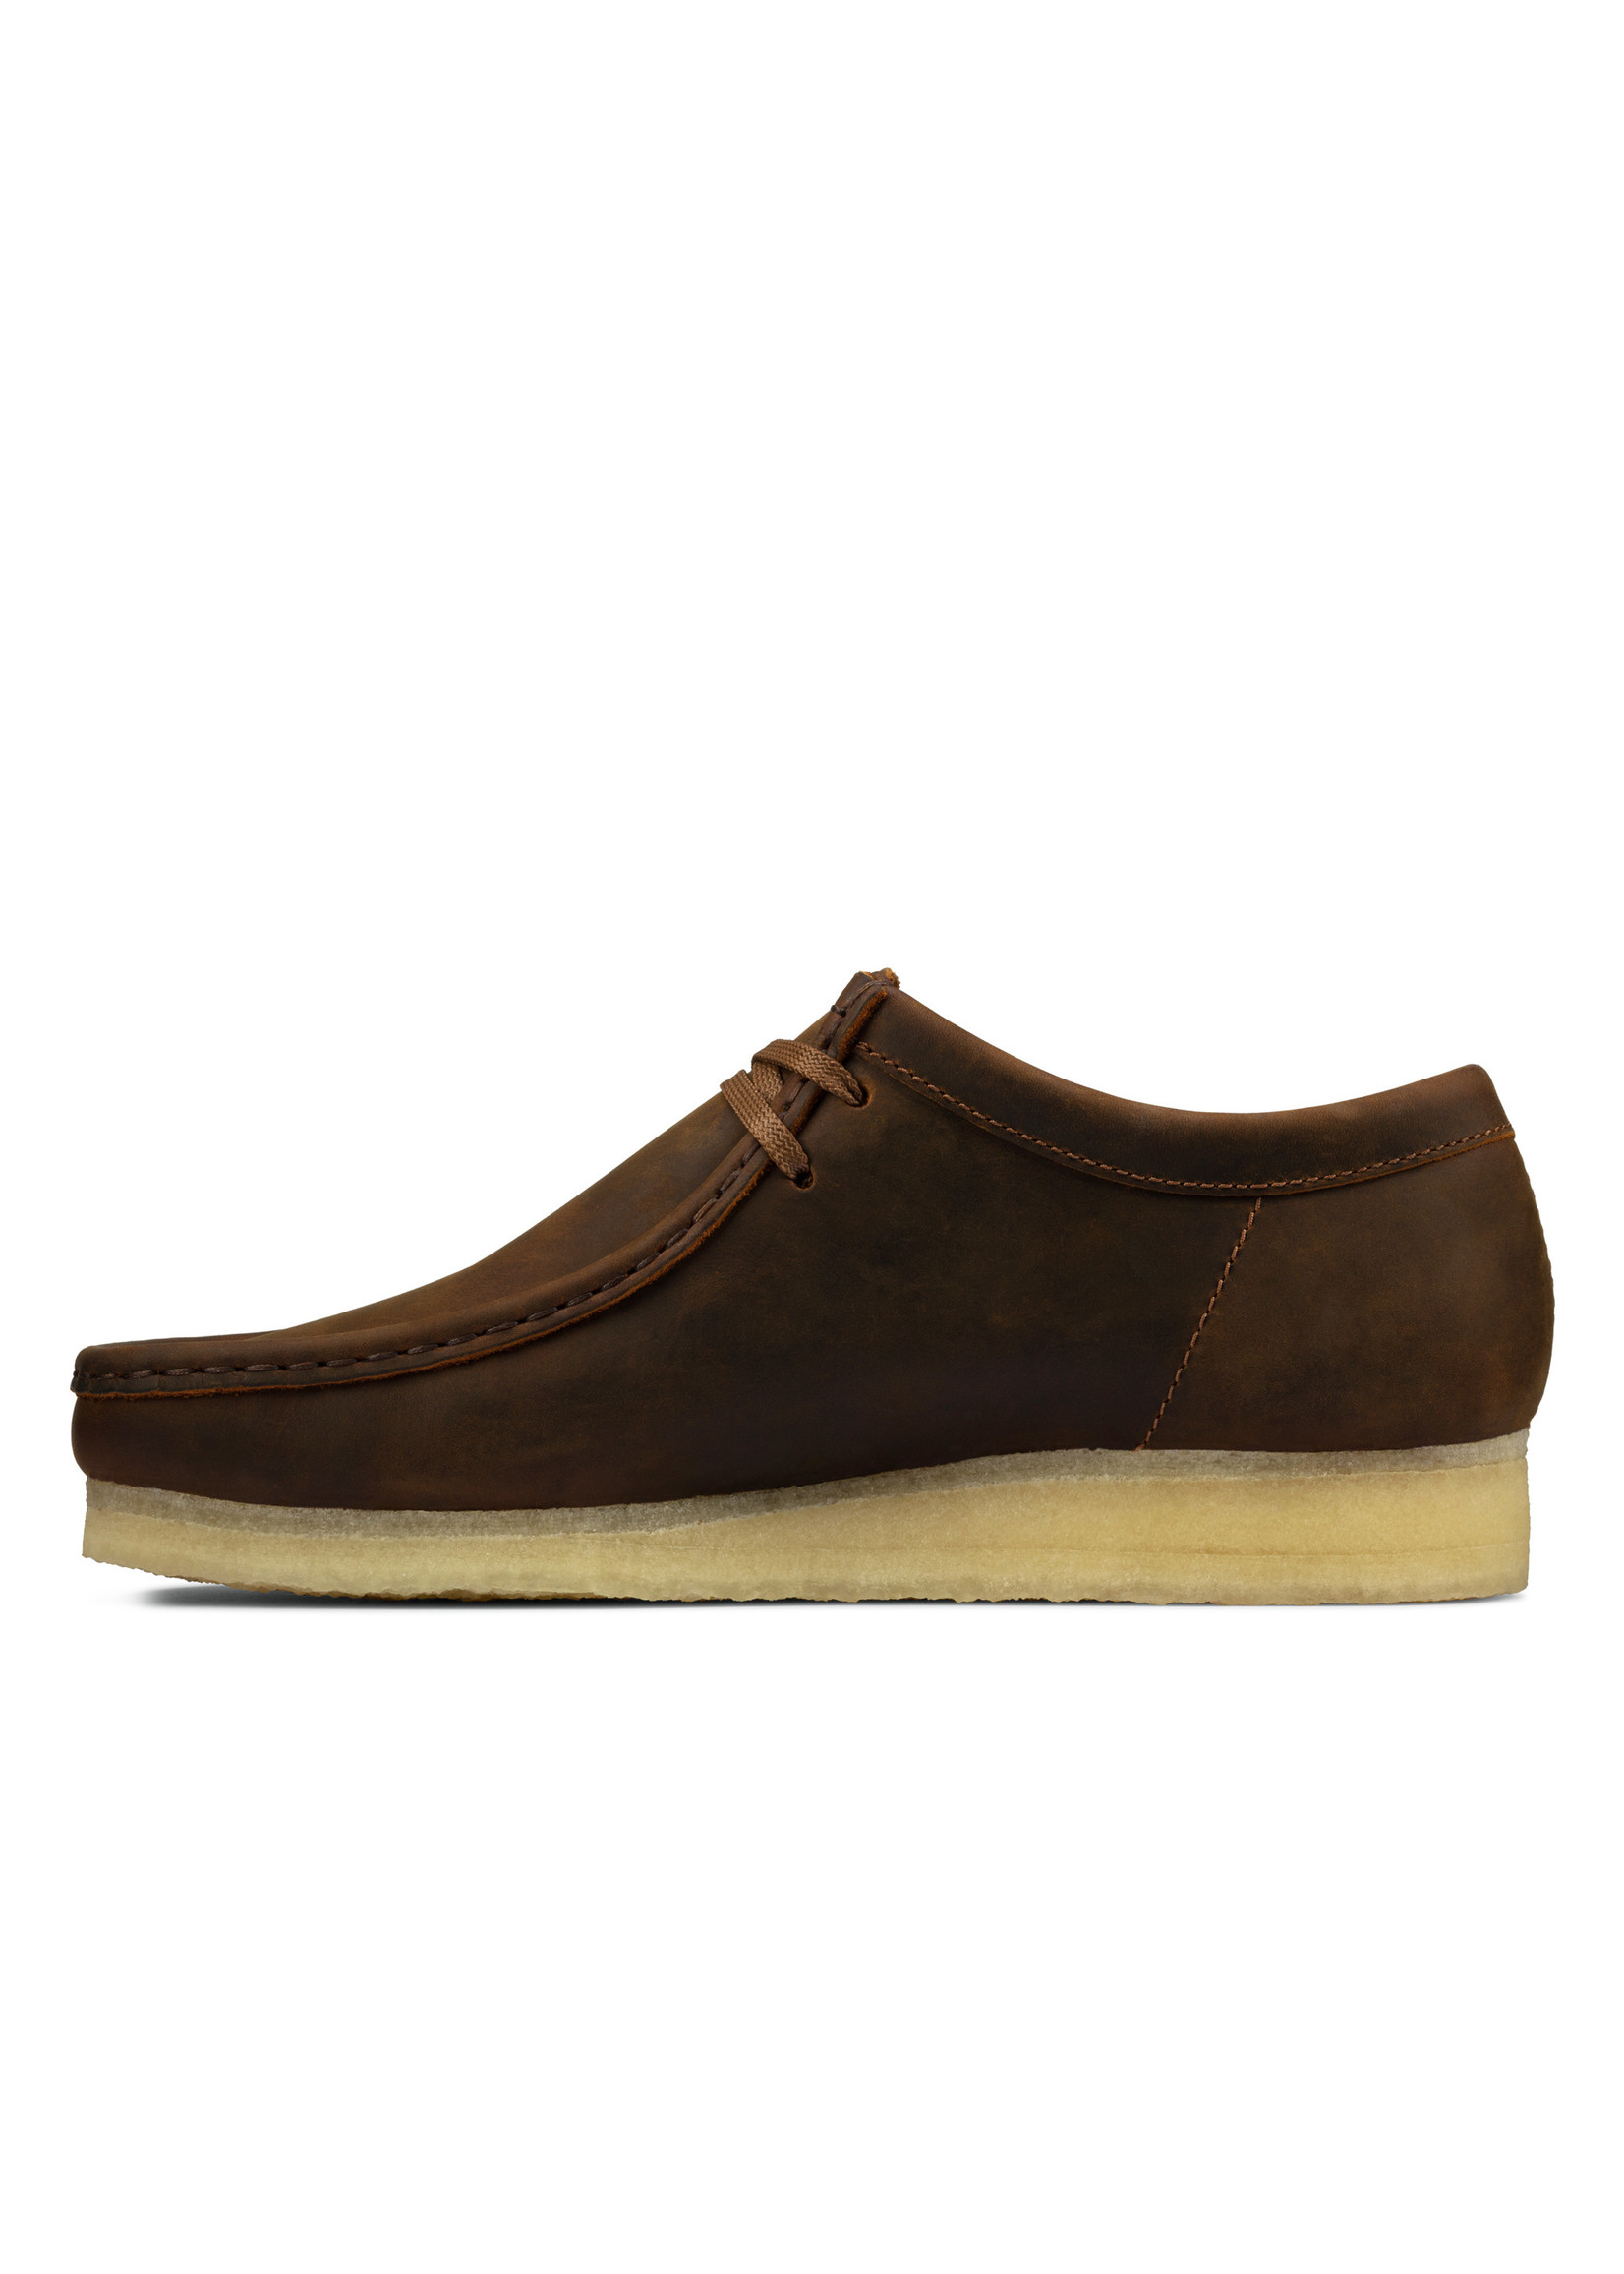 Clarks Mens Iconic Wallabee Beeswax Brown Leather 26156605